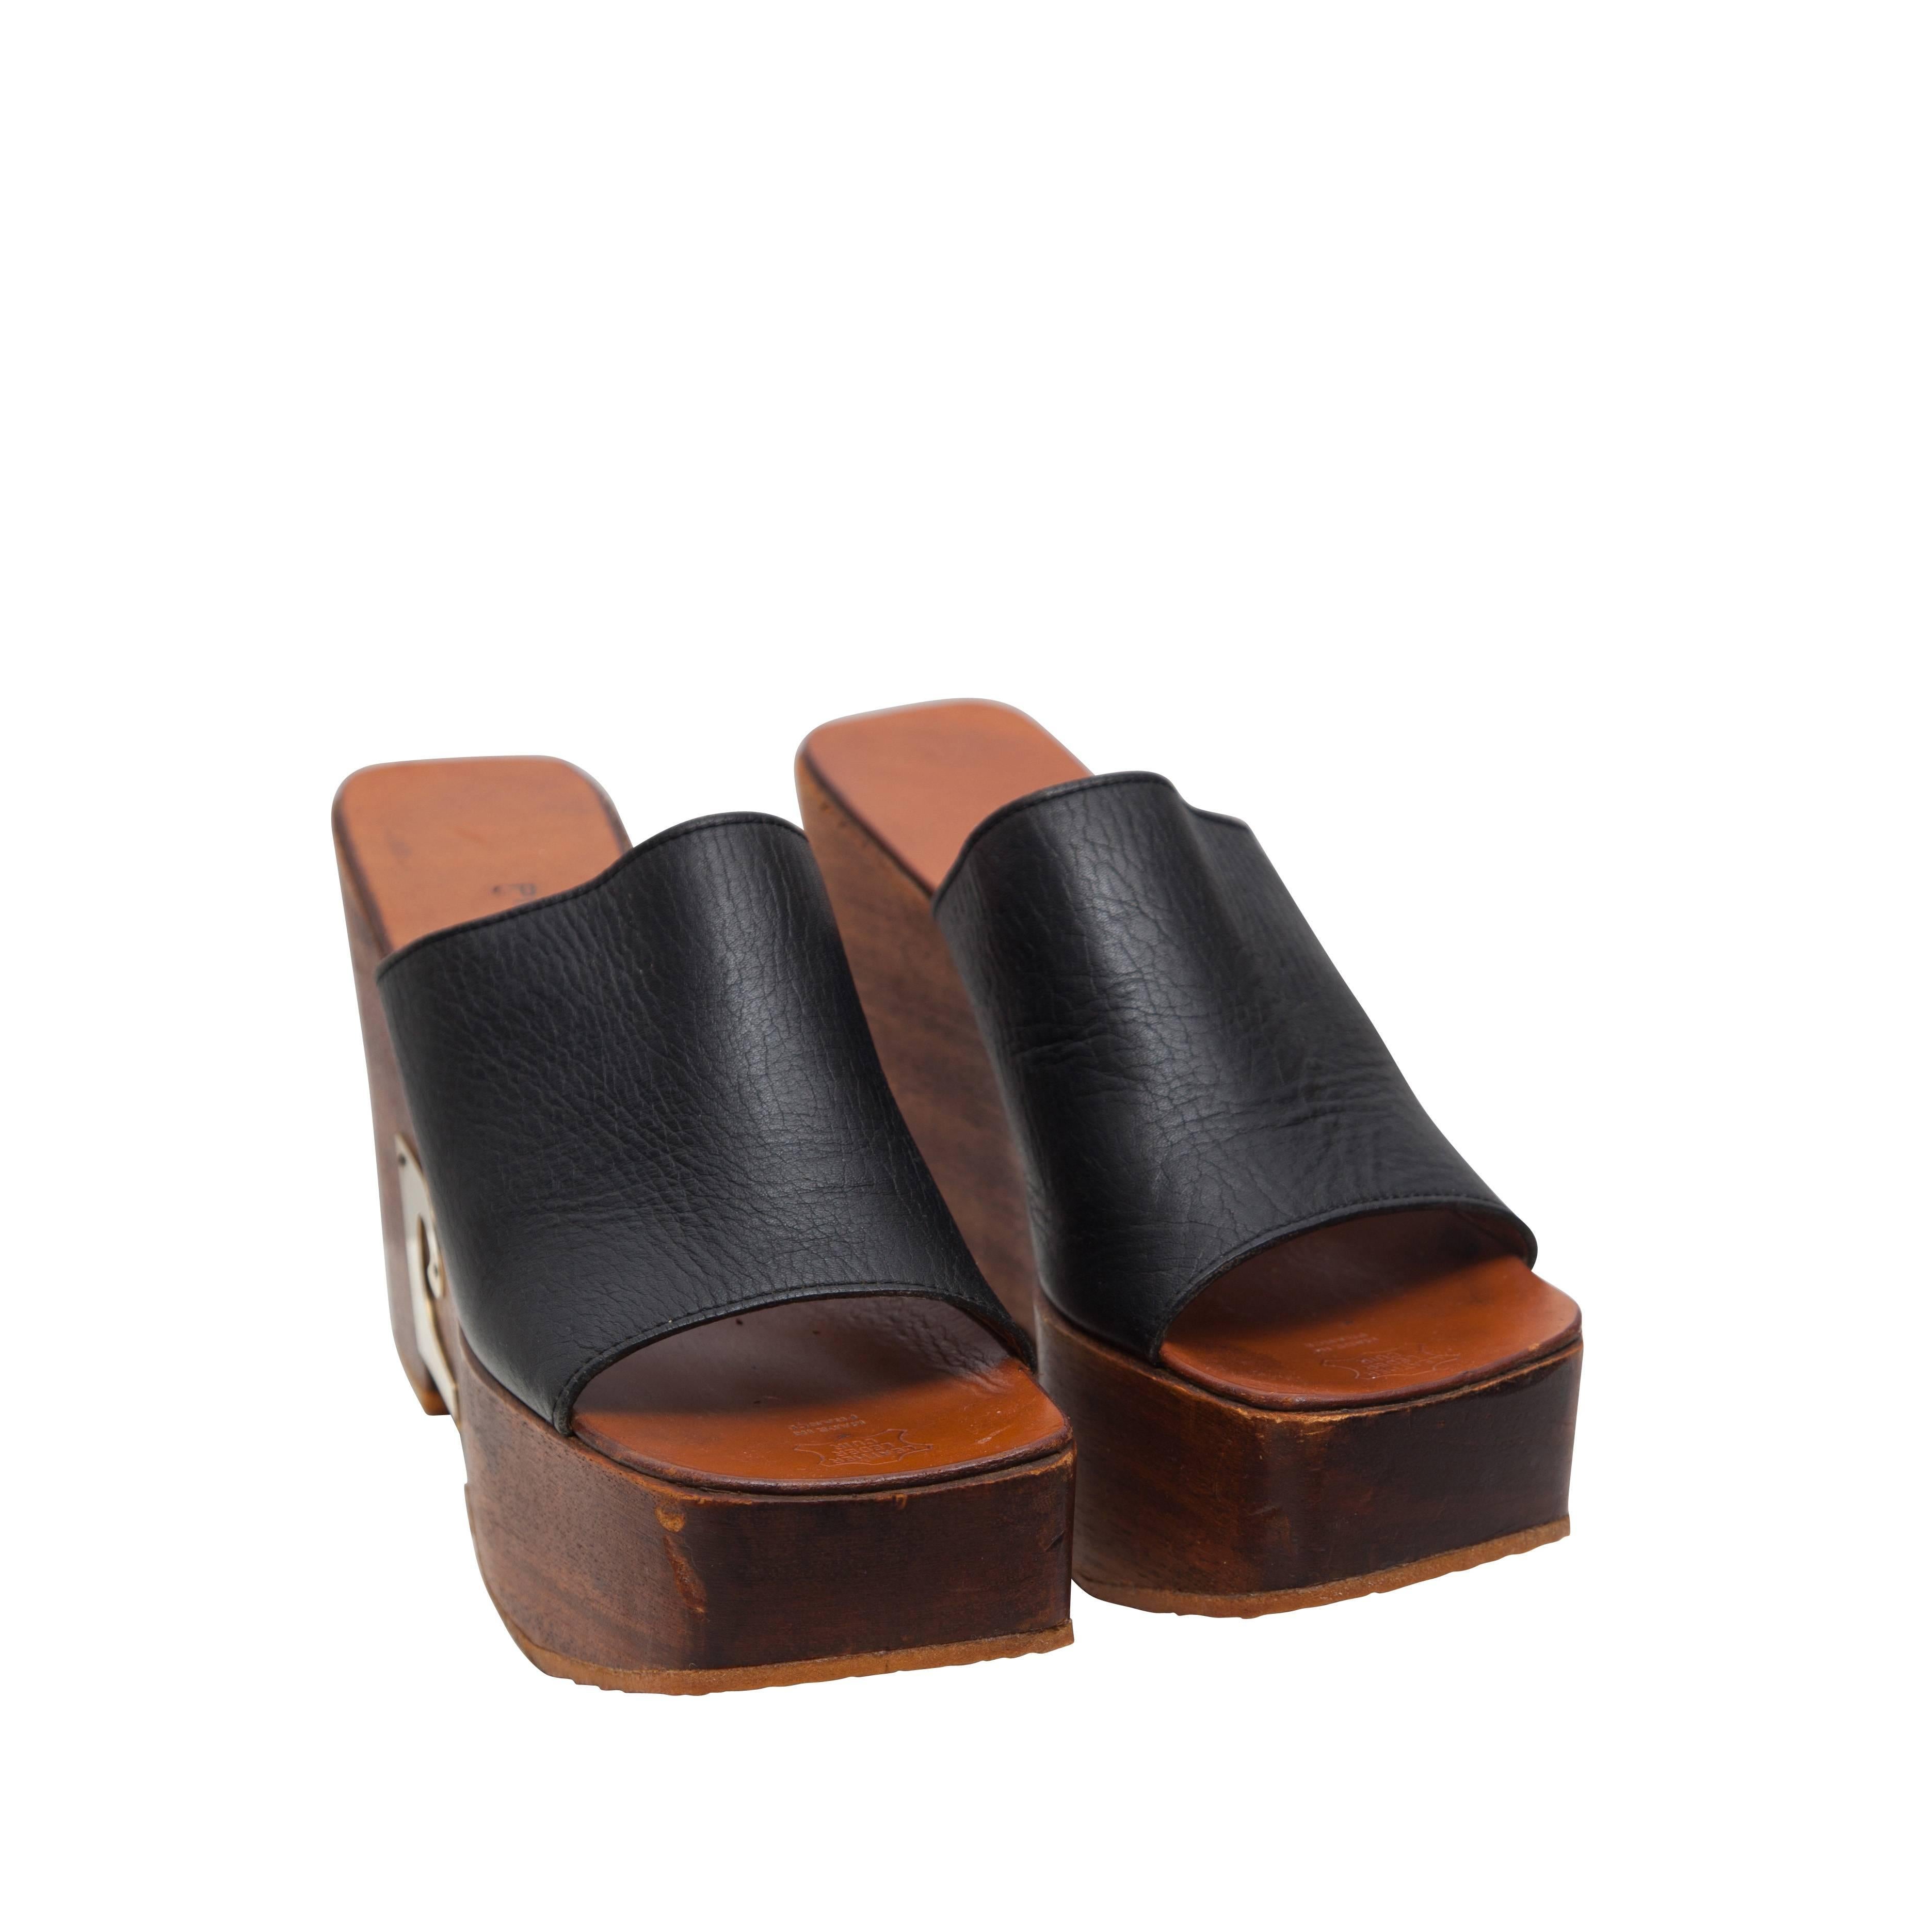 1970's Pierre Cardin wooden heeled wedge shoes, featuring the unmistakable 'PC' logo in golden metal, and wide dark brown leather straps across. The leather on the straps is extremely soft and the wood on the soles shows no sign of wear. Excellent